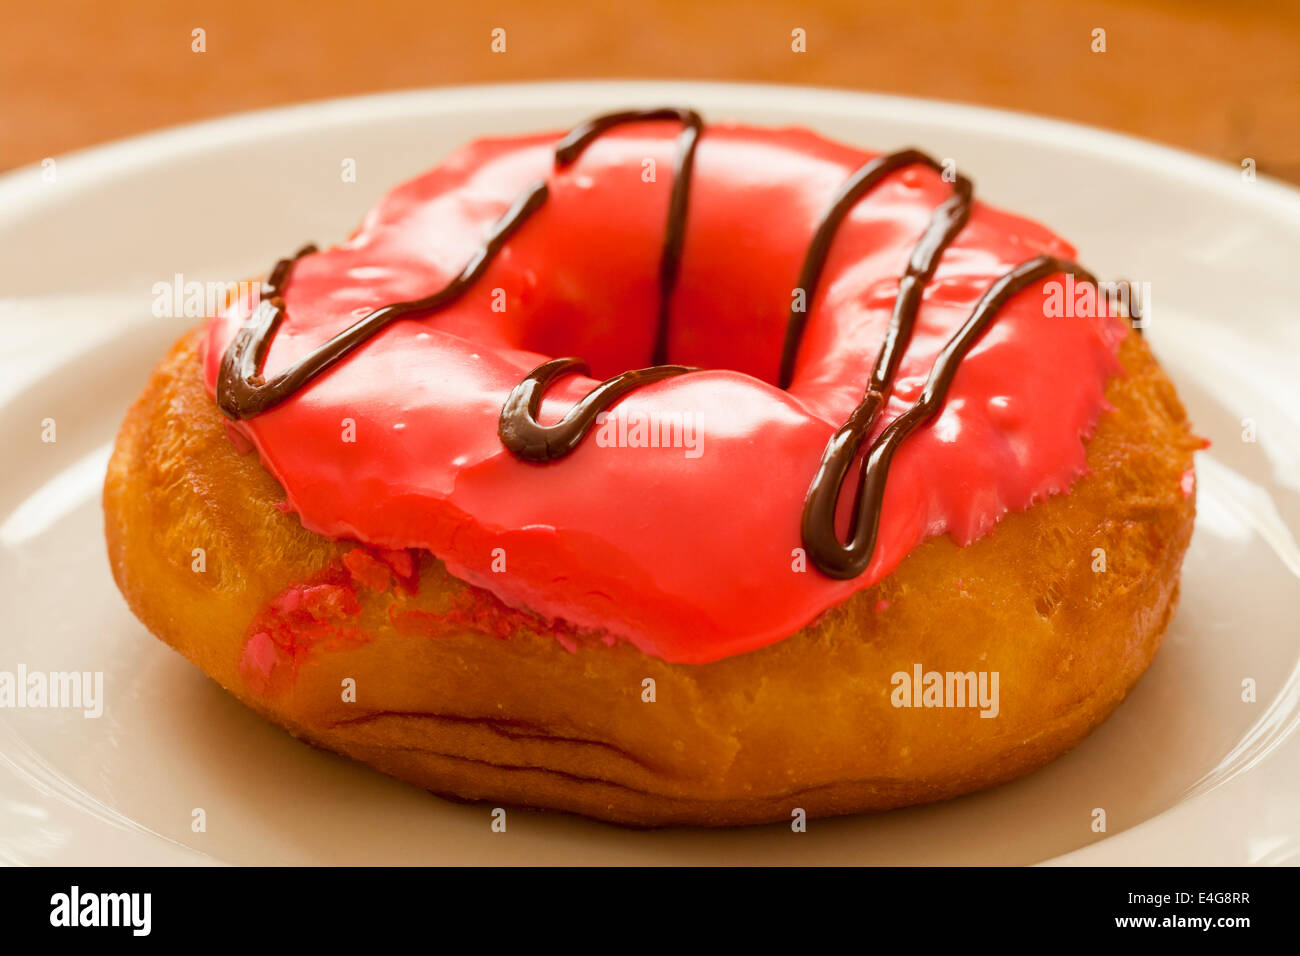 Strawberry frosted doughnut on plate Banque D'Images